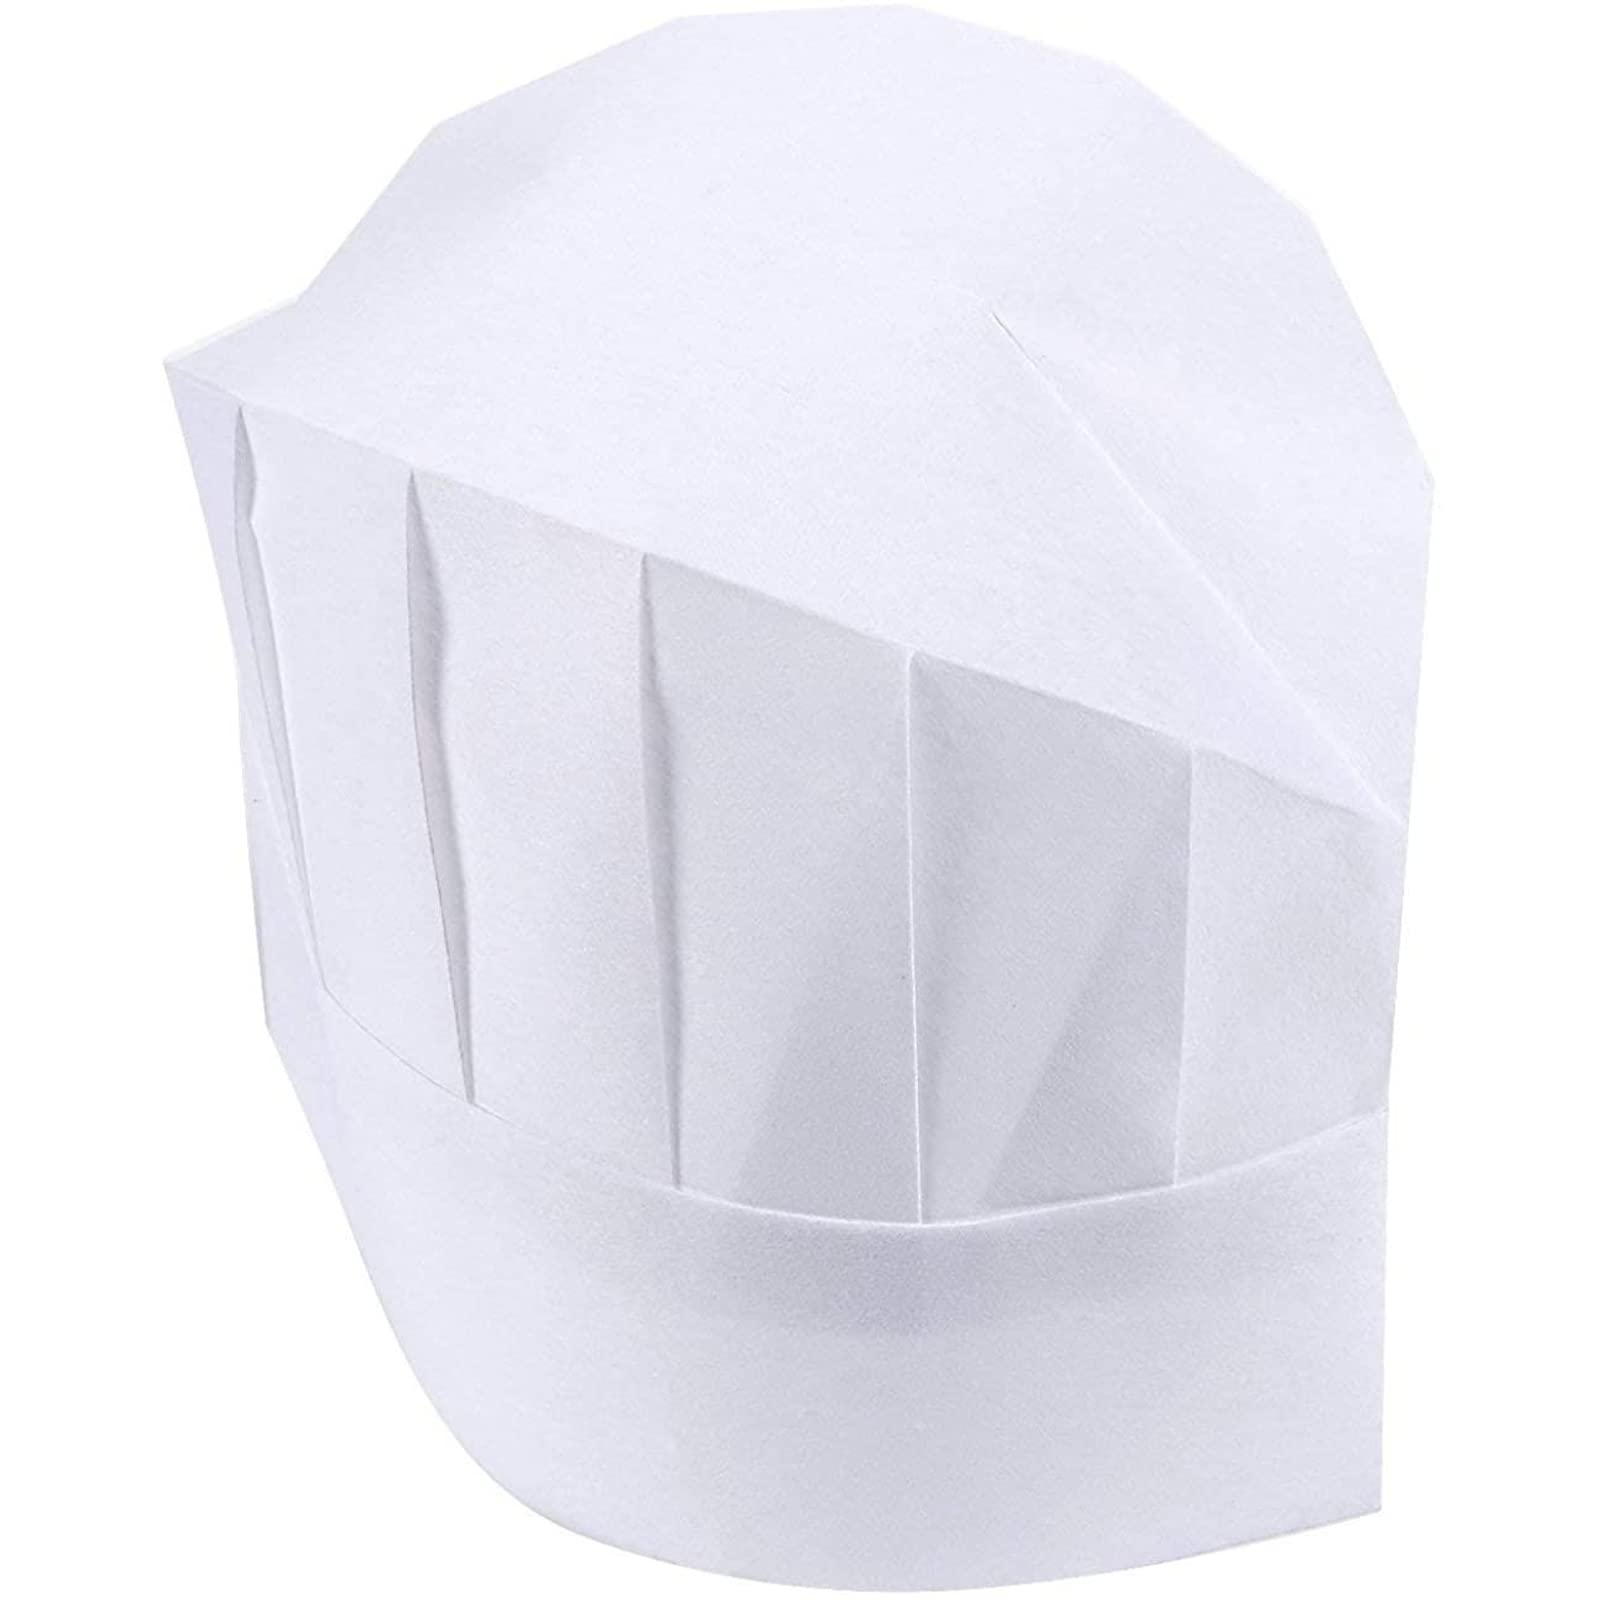 24 Pack Adjustable Chef Hats for Kids and Adults (Non-Woven Fabric, White, 19.6-22.8 in)